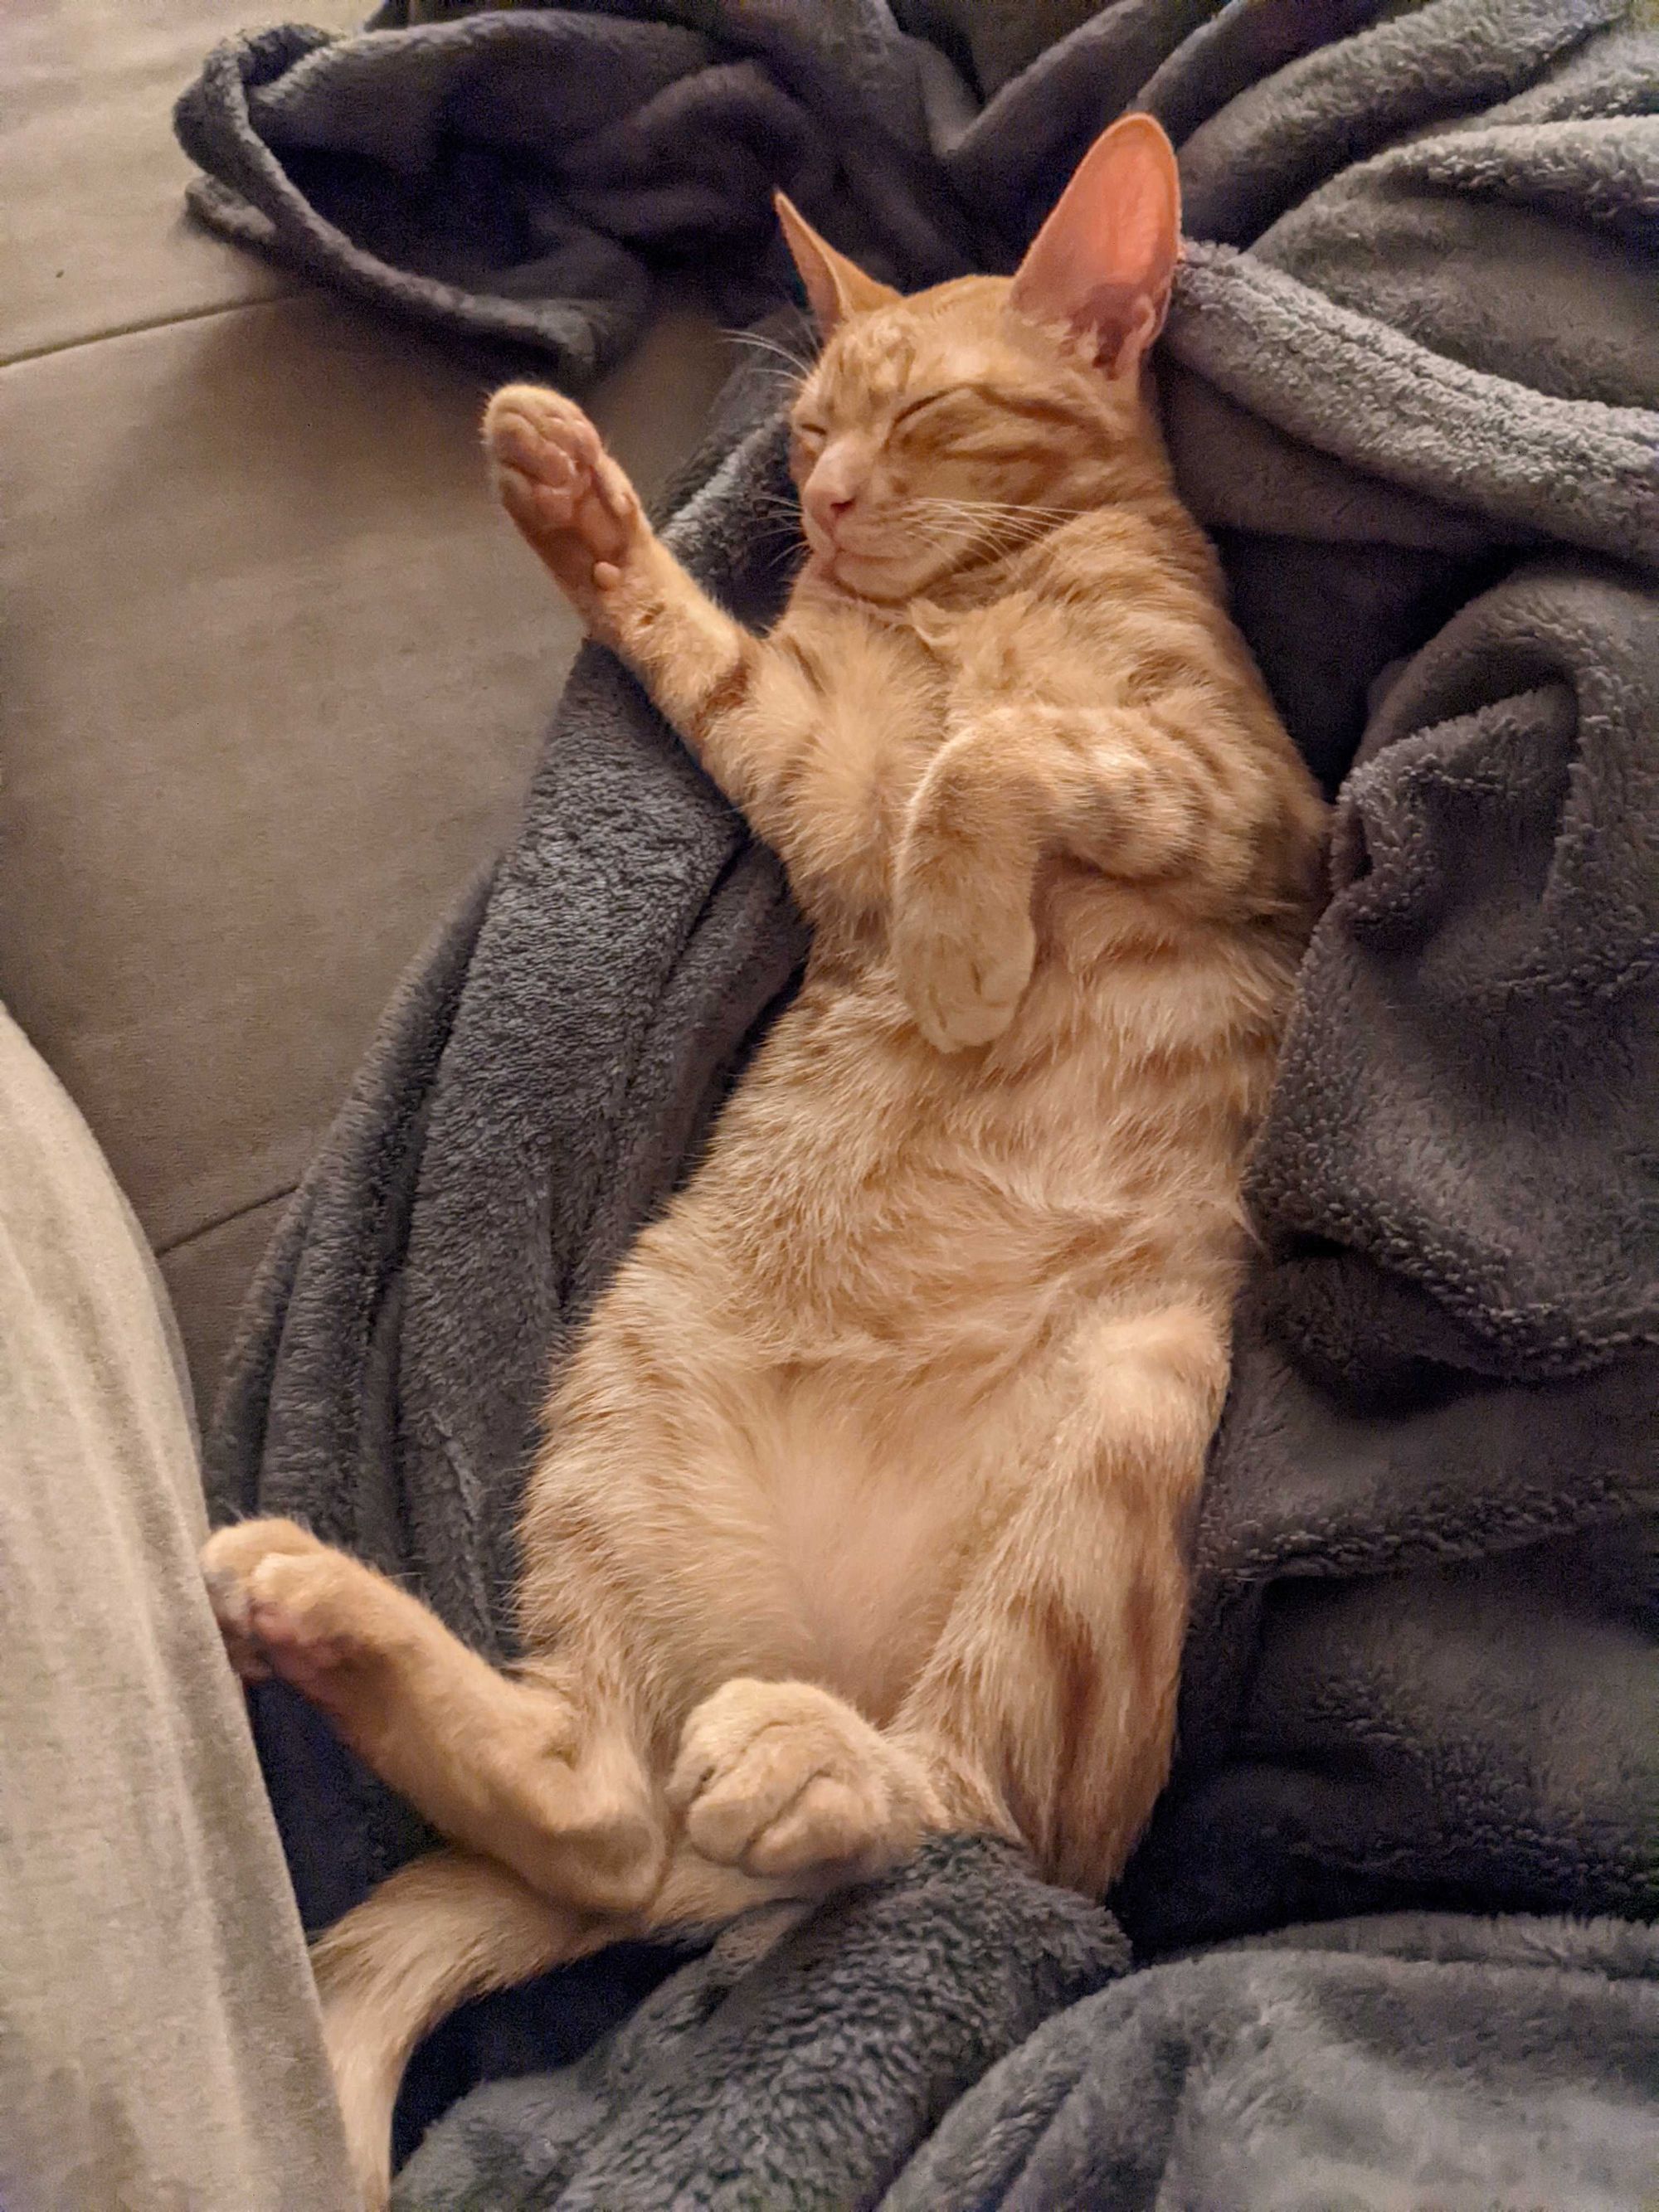 An orange tabby kitten sleeping on his back, with one paw raised like a renaissance portrait of a pope. His paws are huge, and he is extremely long. How did he get so long?? That can't be allowed.